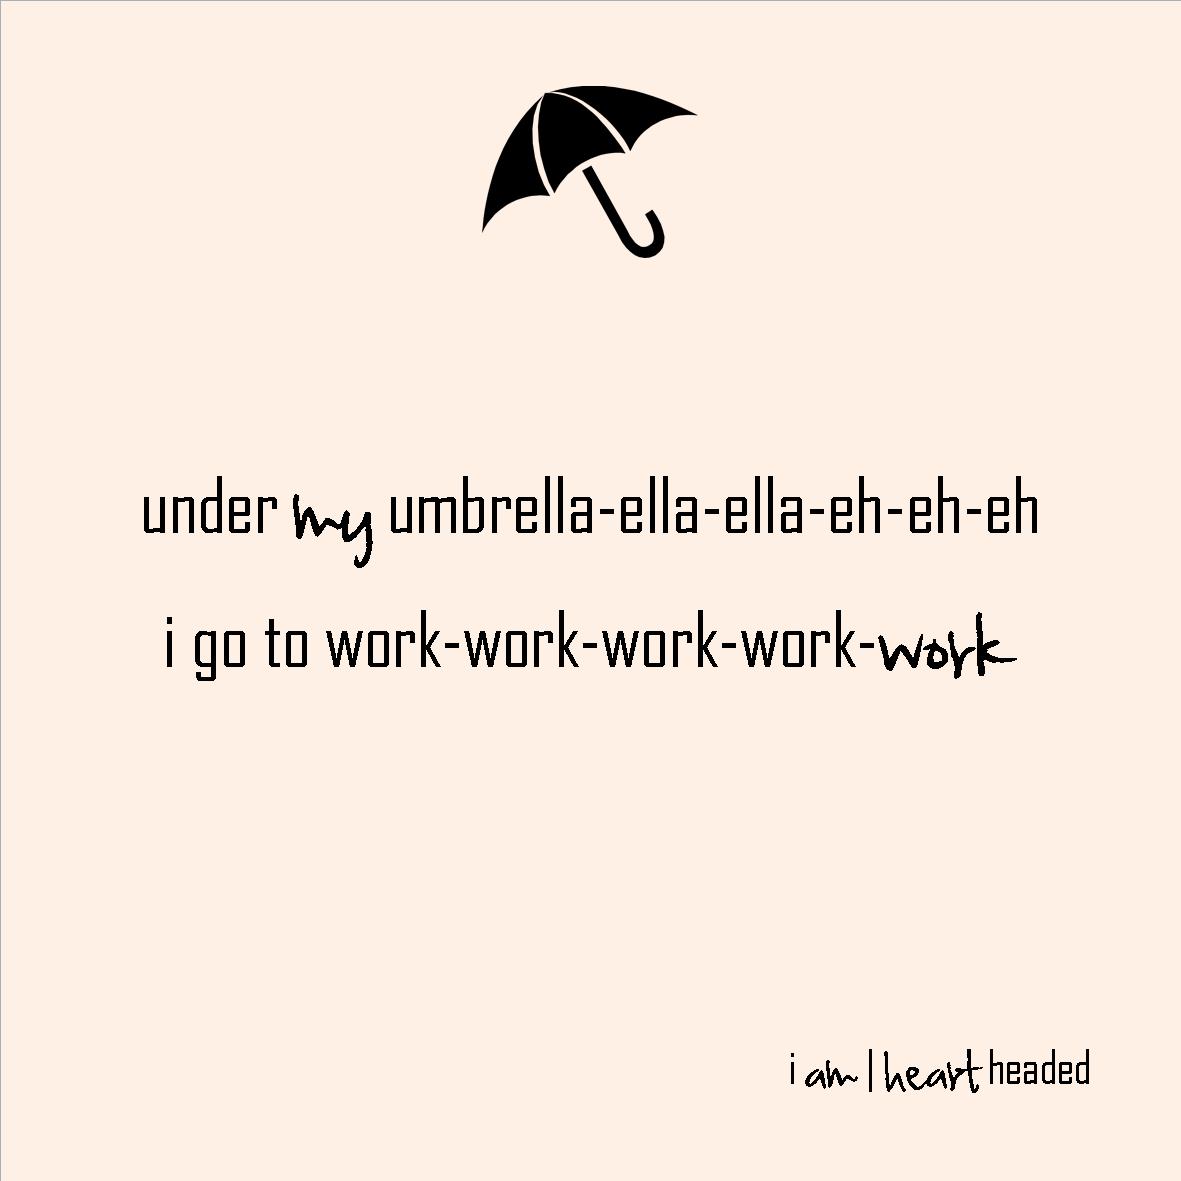 full-size featured image of quote 'under my umbrella' in category 'witty' at i am | heart headed